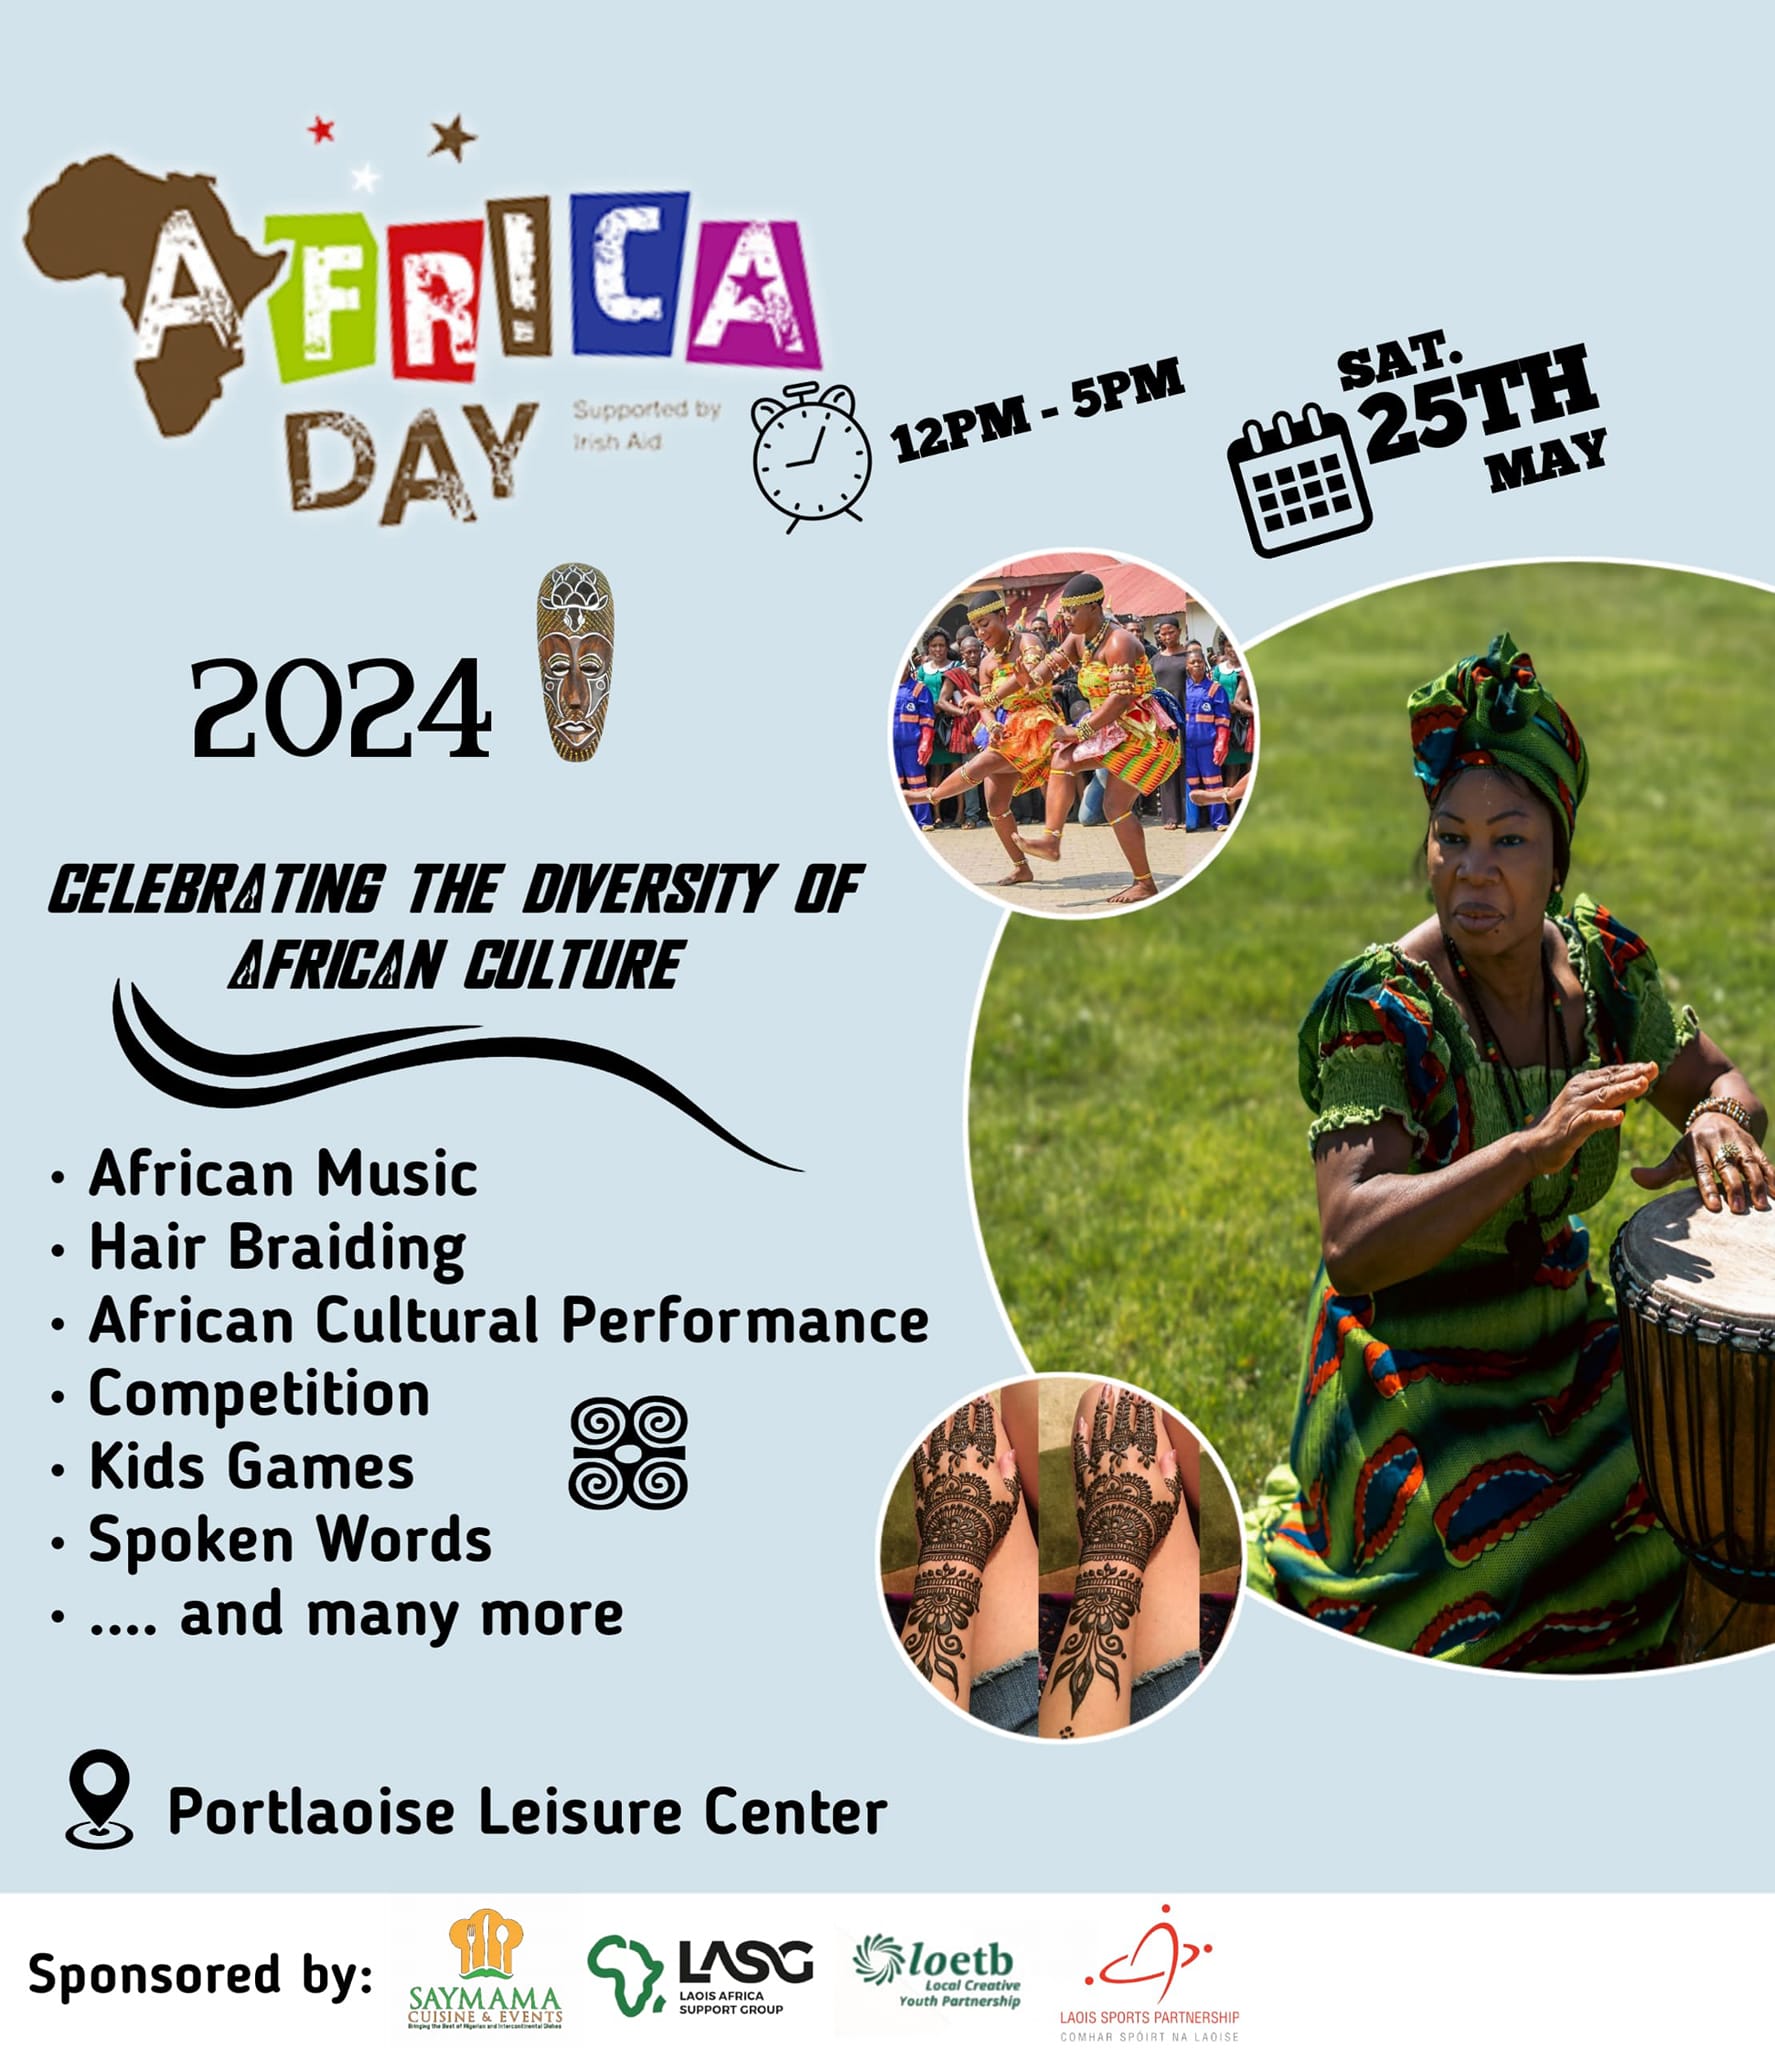 Poster for Laois Africa Day 2024 taking place on May 25th 2024. It lists a number of events happening and features an African woman dressed in traditional attire